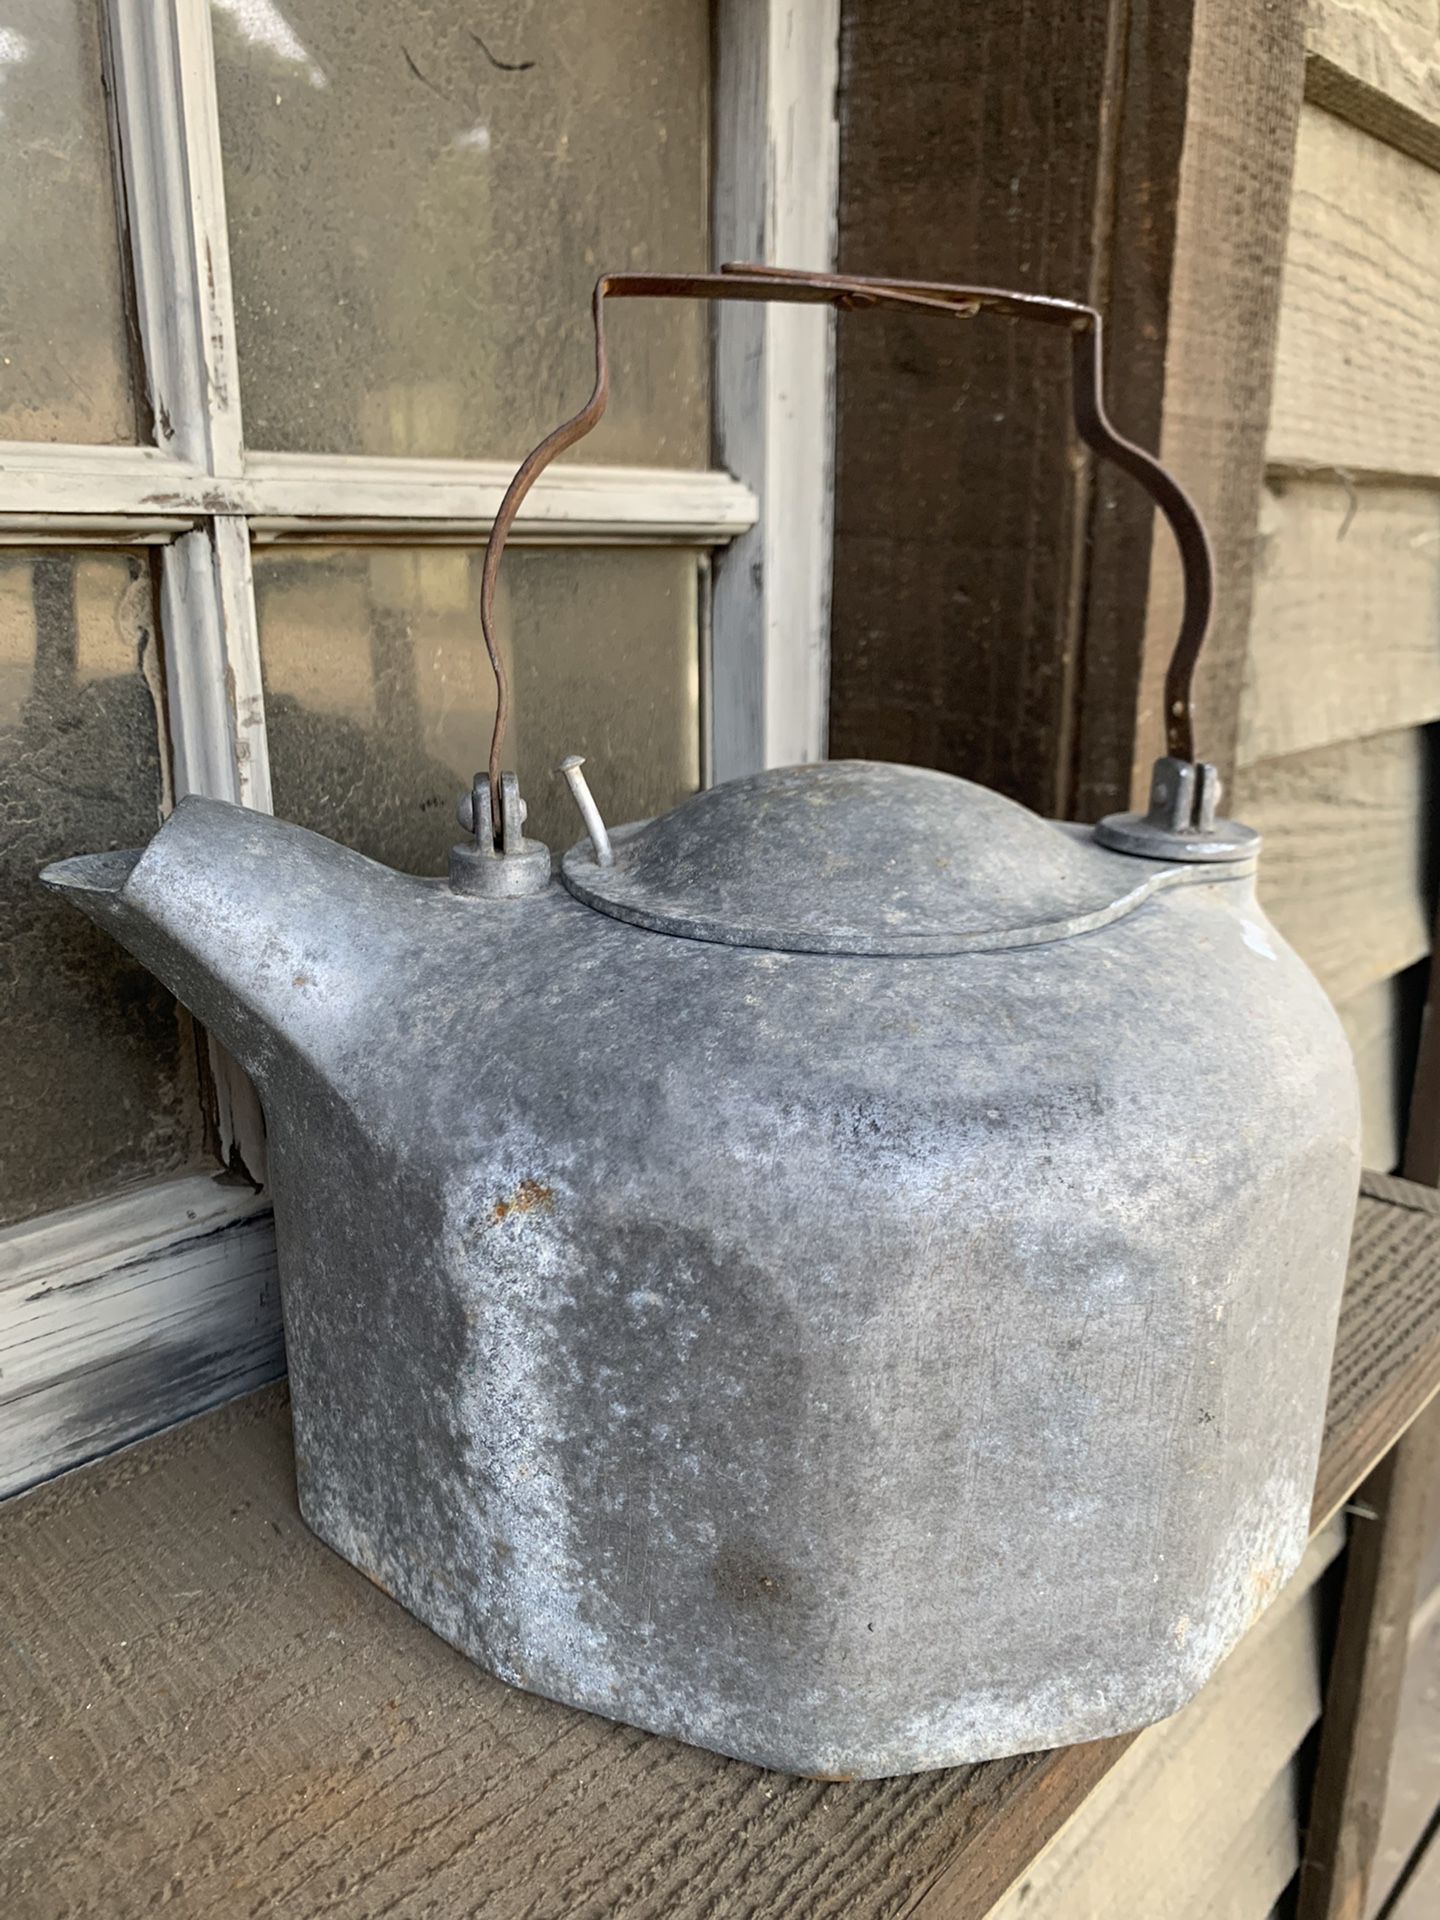 Vintage Cast Aluminum Yea Kettle Needs To Be Cleaned